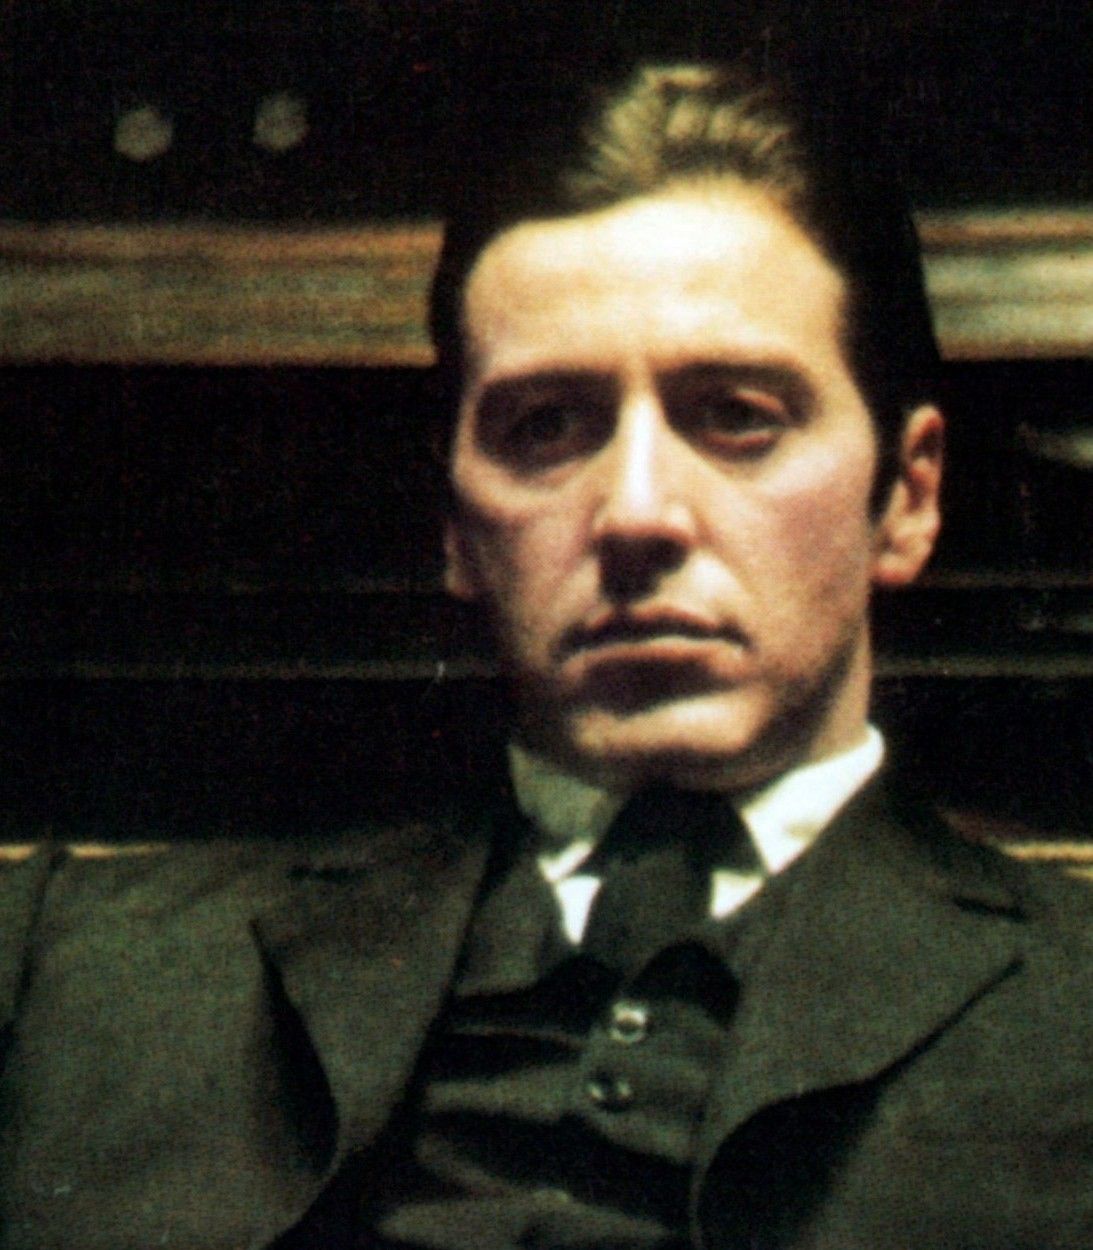 Al Pacino as Michael Corleone in The Godfather vertical